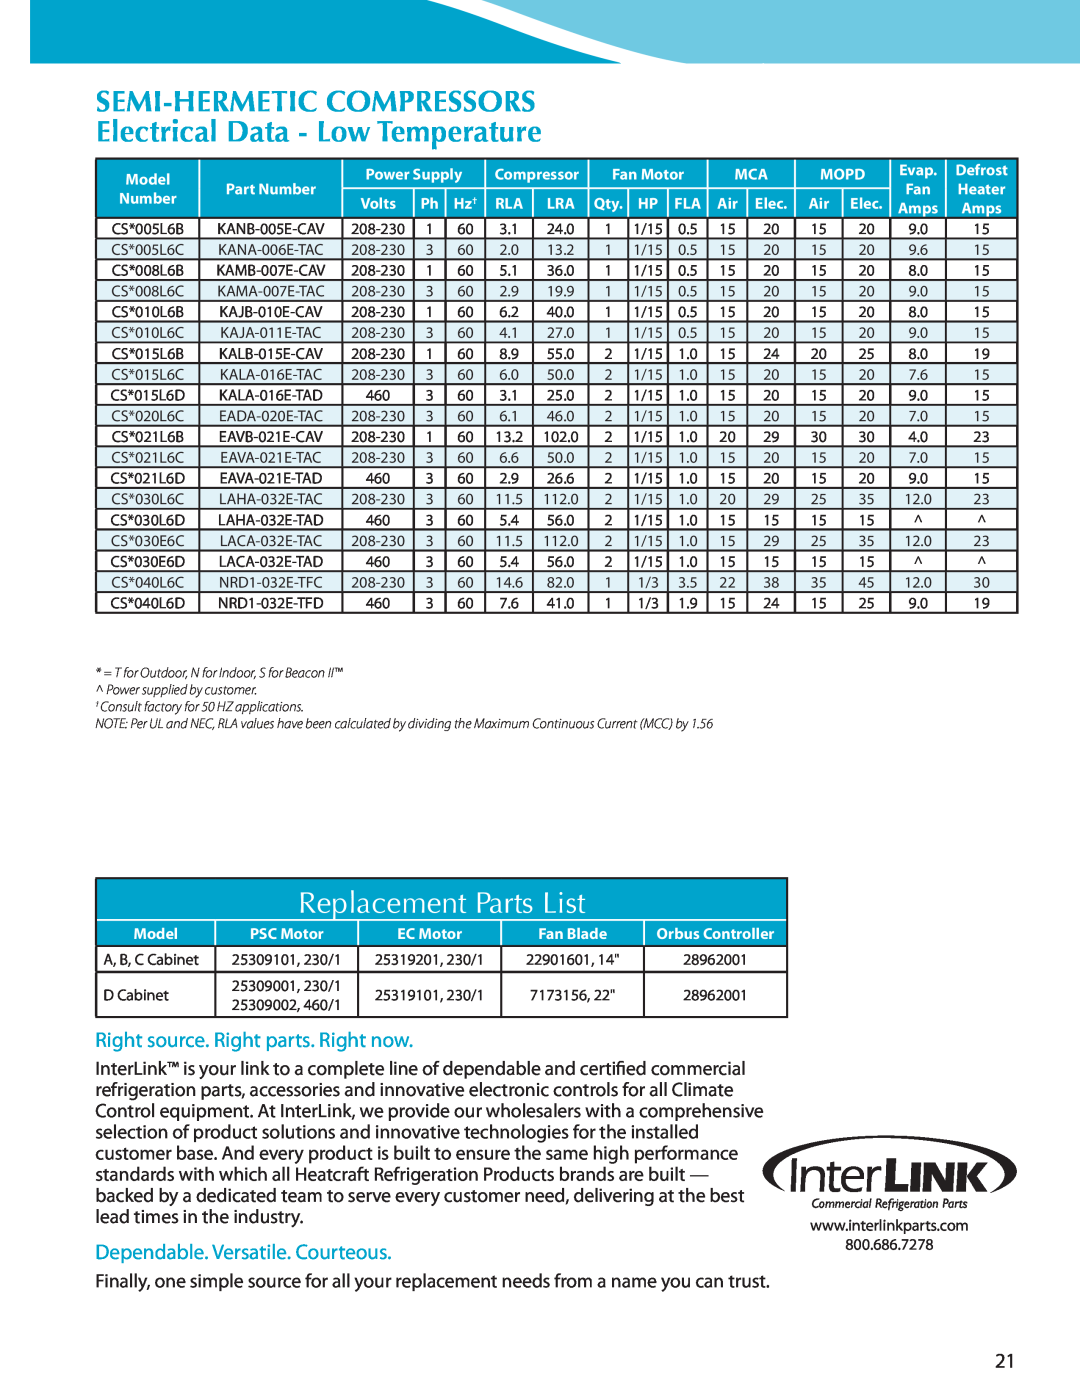 Heatcraft Refrigeration Products CC-HTSTB manual Electrical Data - Low Temperature, Replacement Parts List 